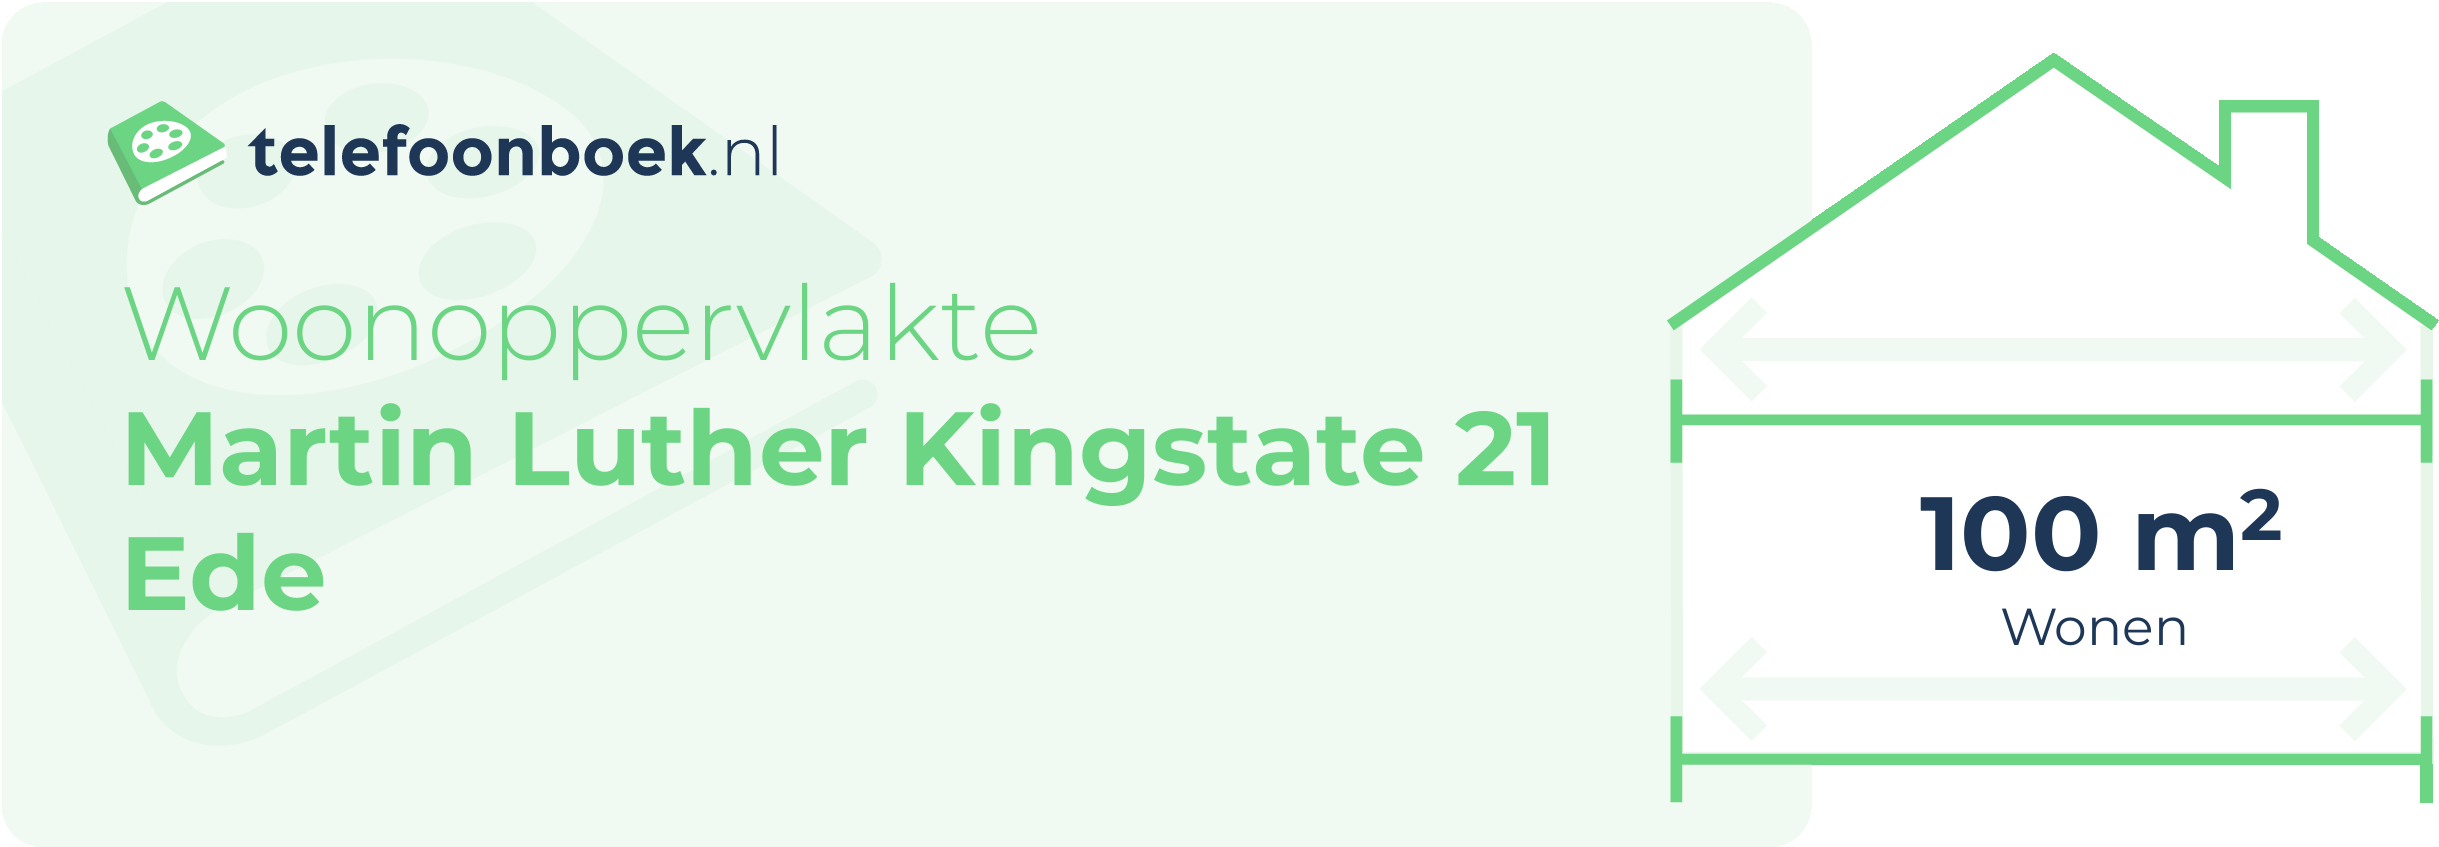 Woonoppervlakte Martin Luther Kingstate 21 Ede